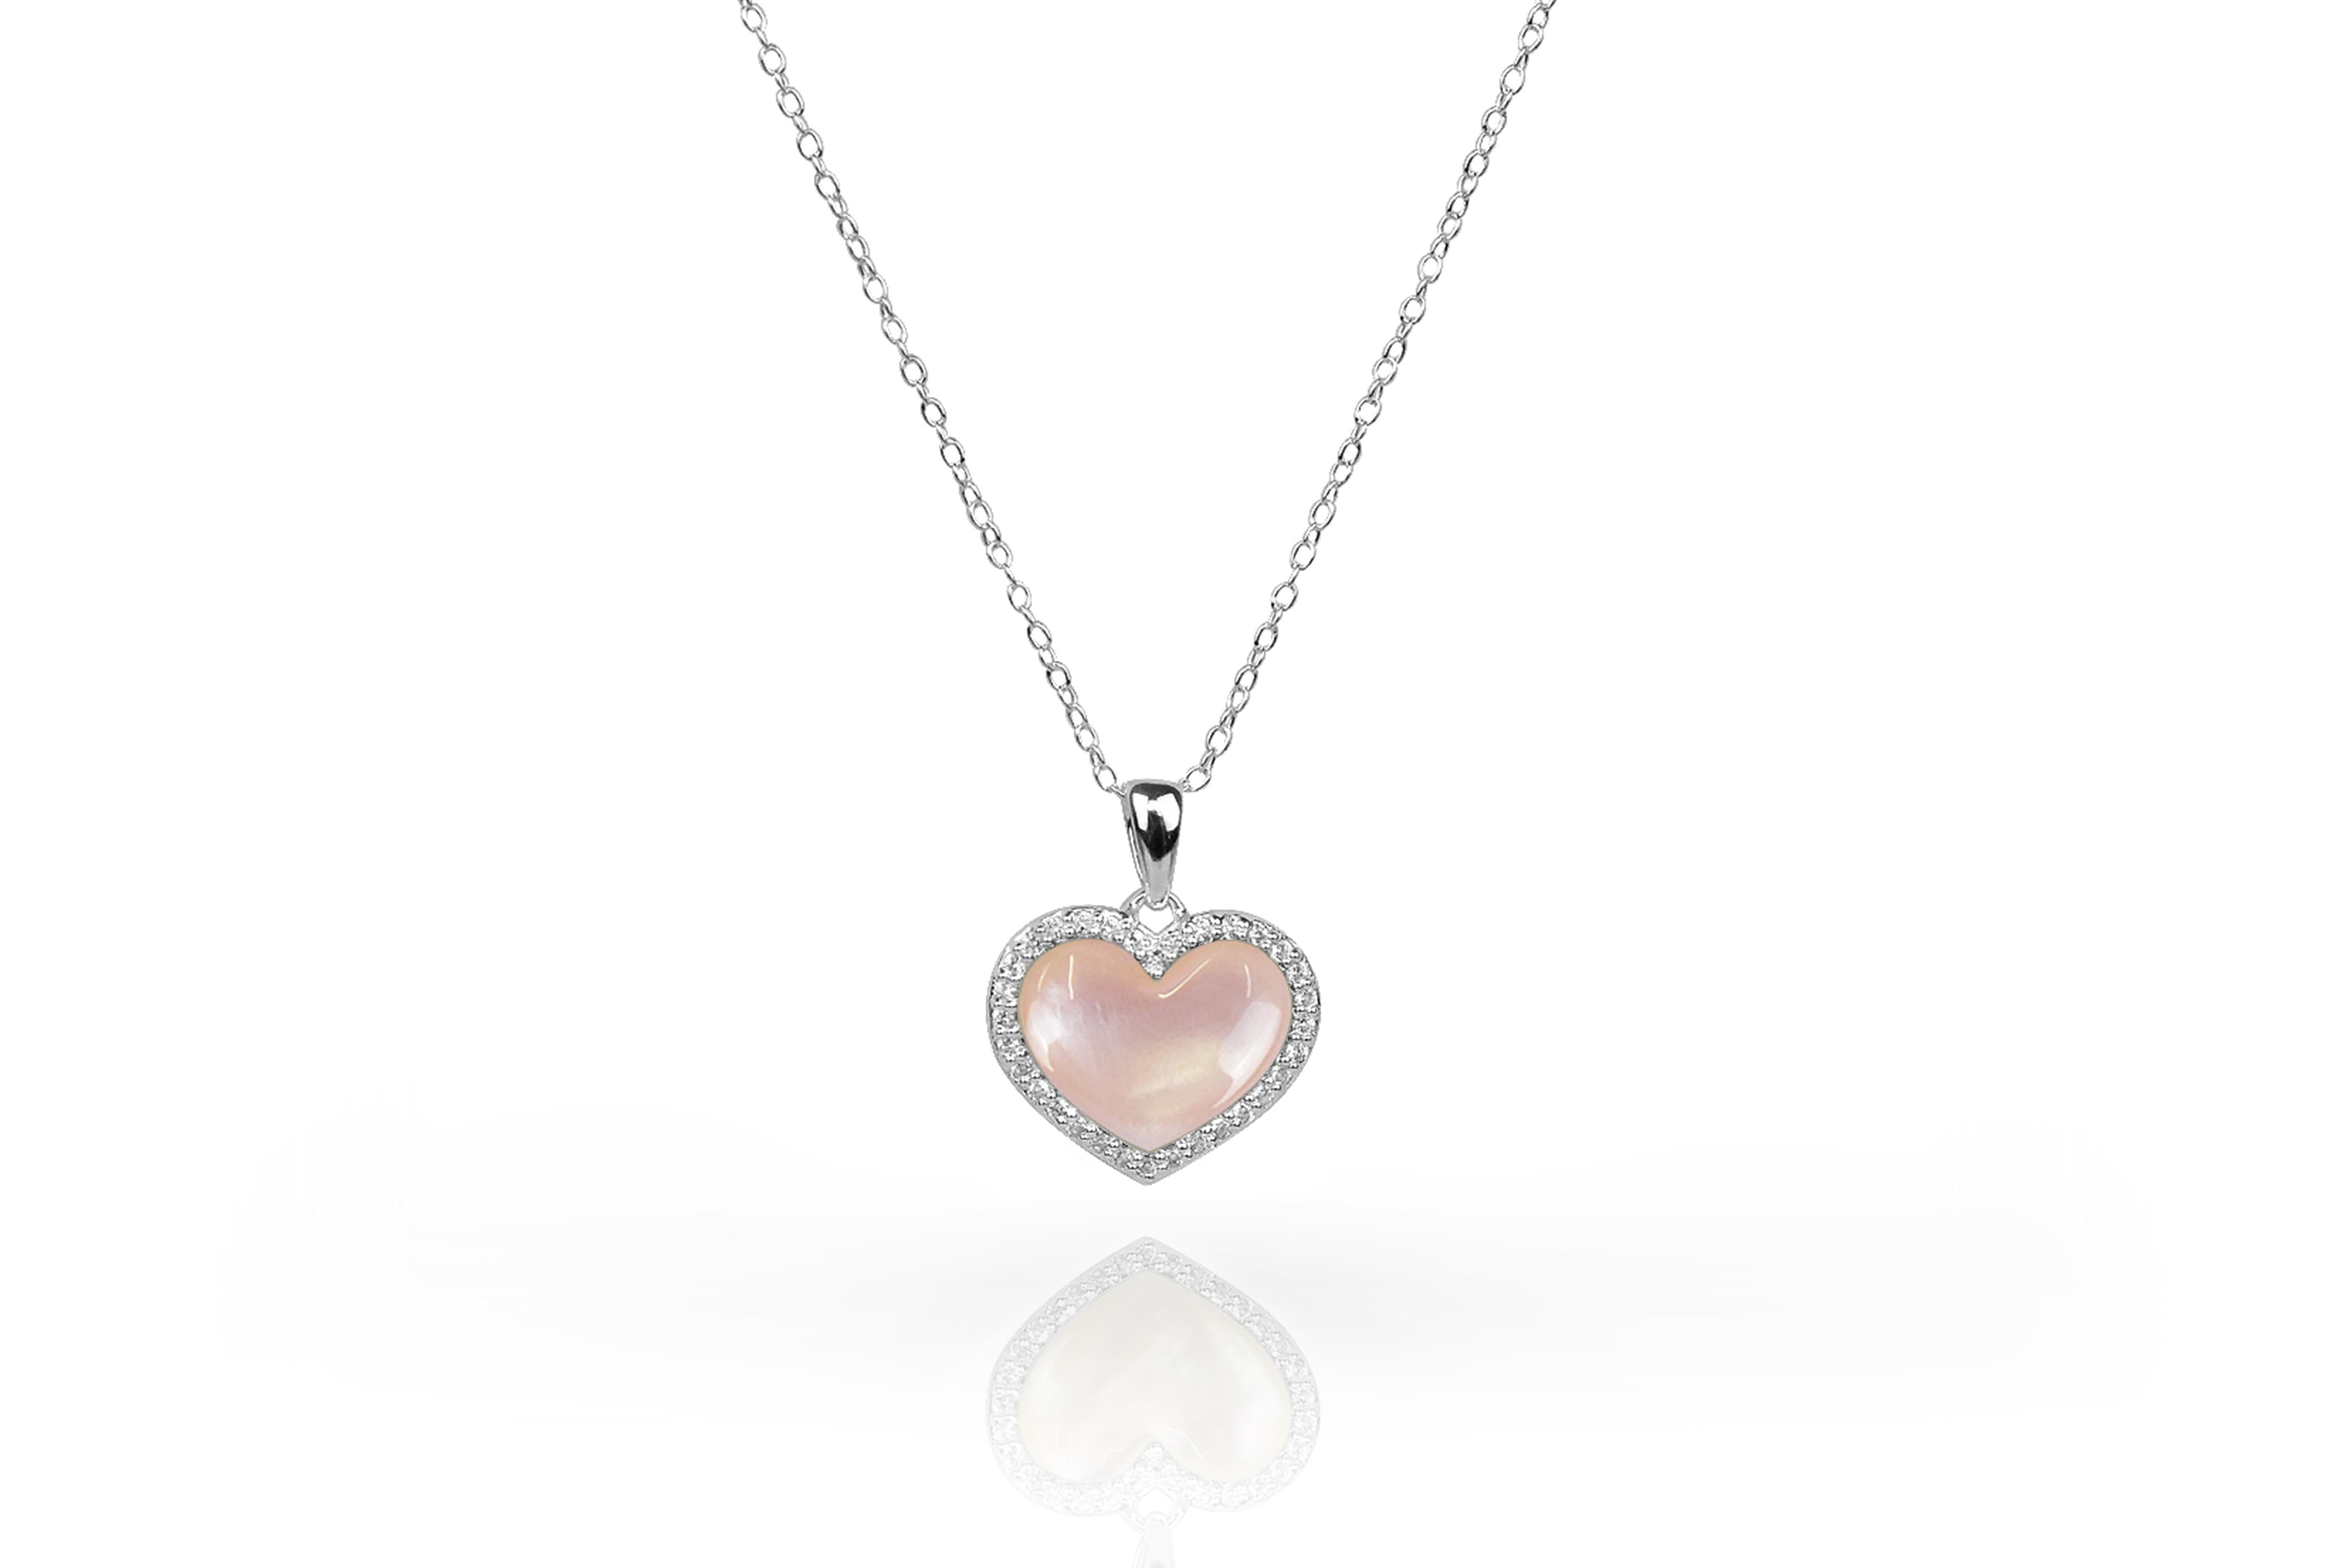 Diamond and Gemstone Heart Pendant with 14K solid gold necklace available in three colors of gold and four options of gemstone.
Gold: White Gold / Rose Gold / Yellow Gold.
Gemstone: Abalone / Tahitian Black MOP / White MOP / Pink MOP

Delicate